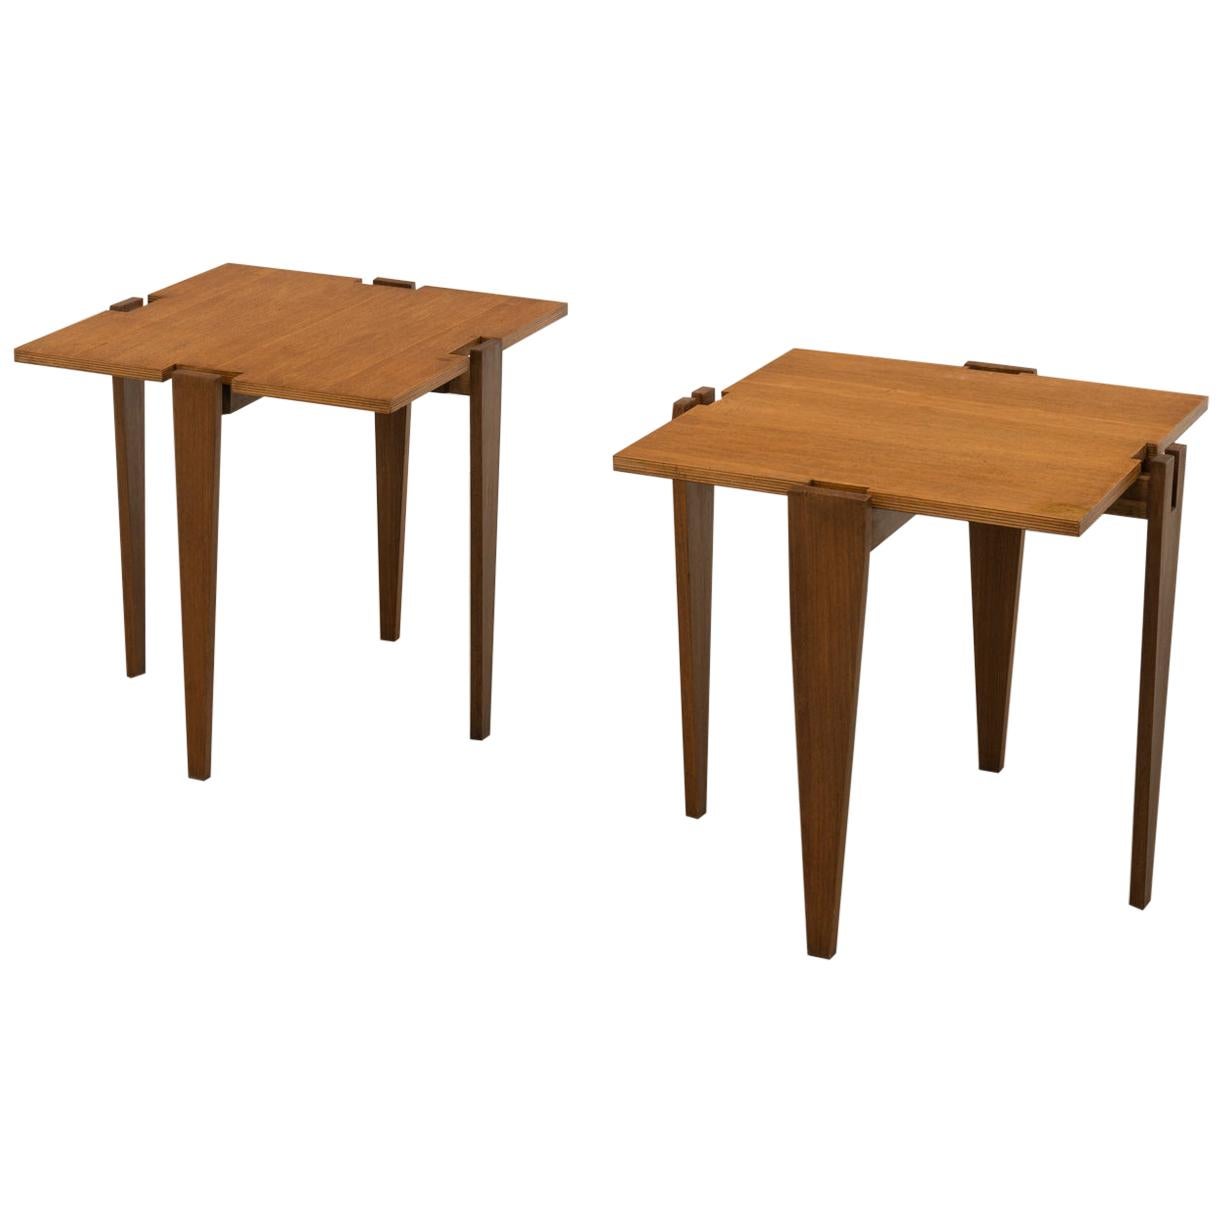 Angelo Ostuni & Renato Forti Pair of Wood Combinable Side Tables for Frangi 1957 For Sale